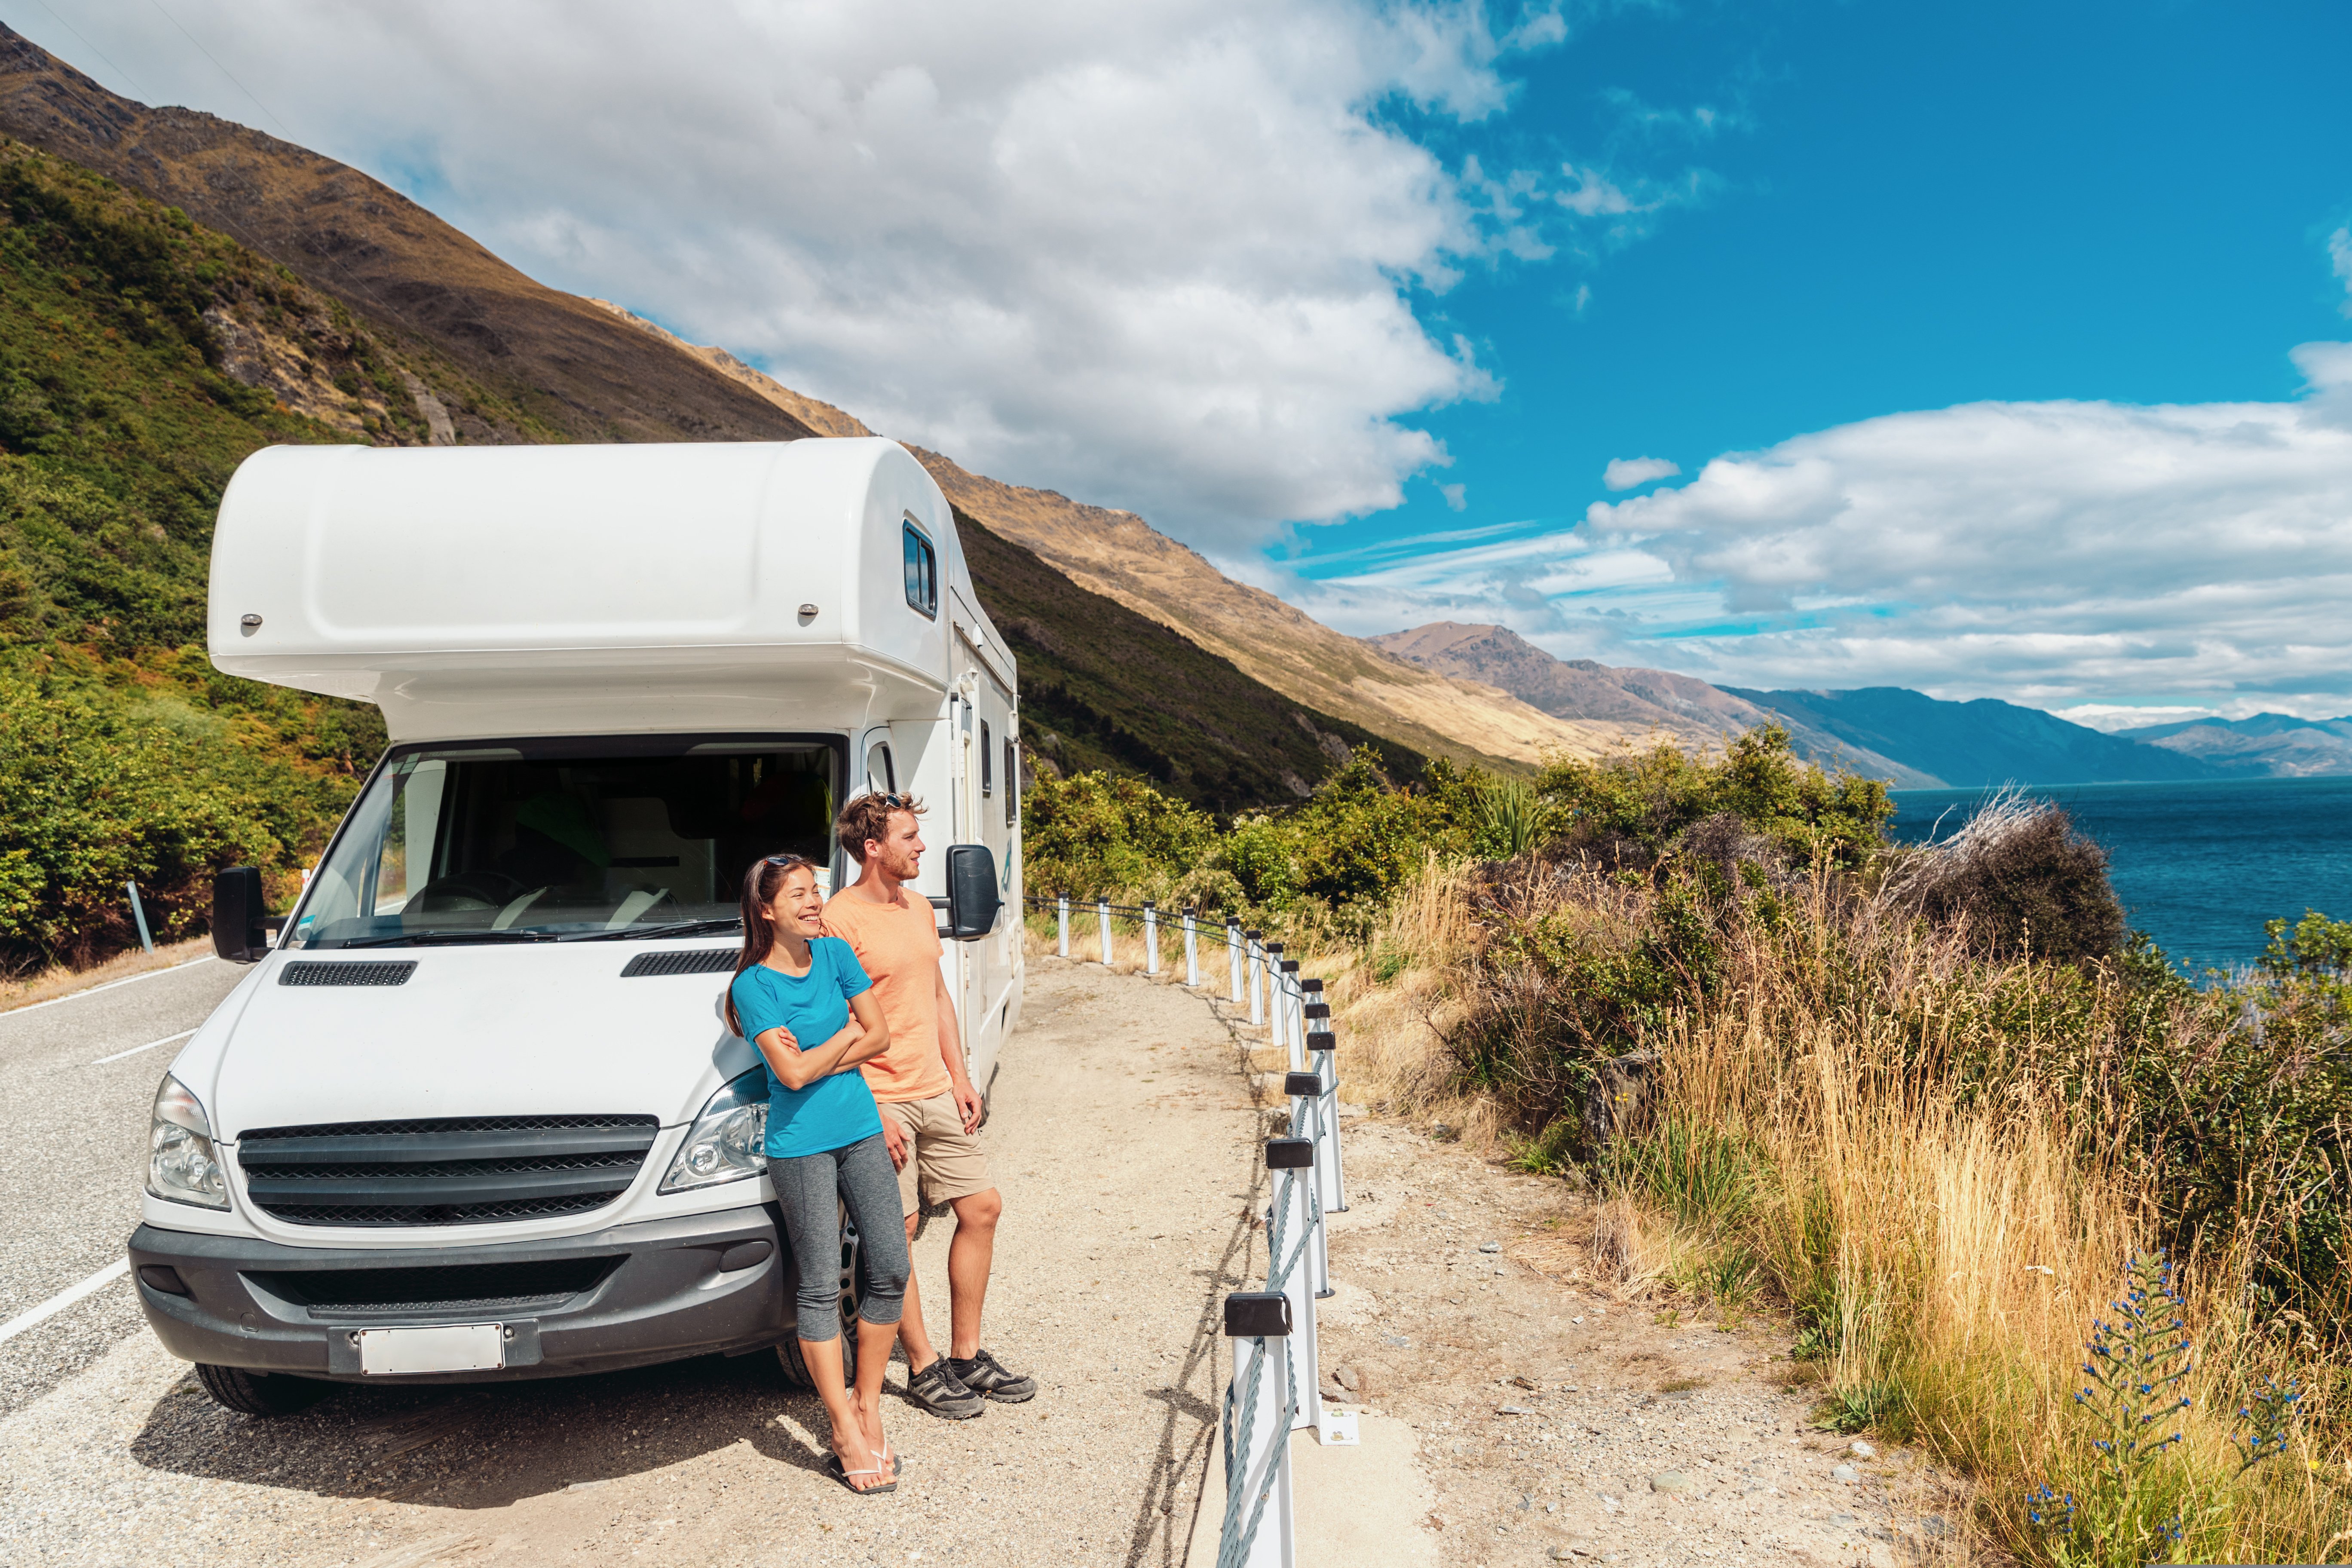 Two friends leaning against their camper van taking in the beautiful mountainous view